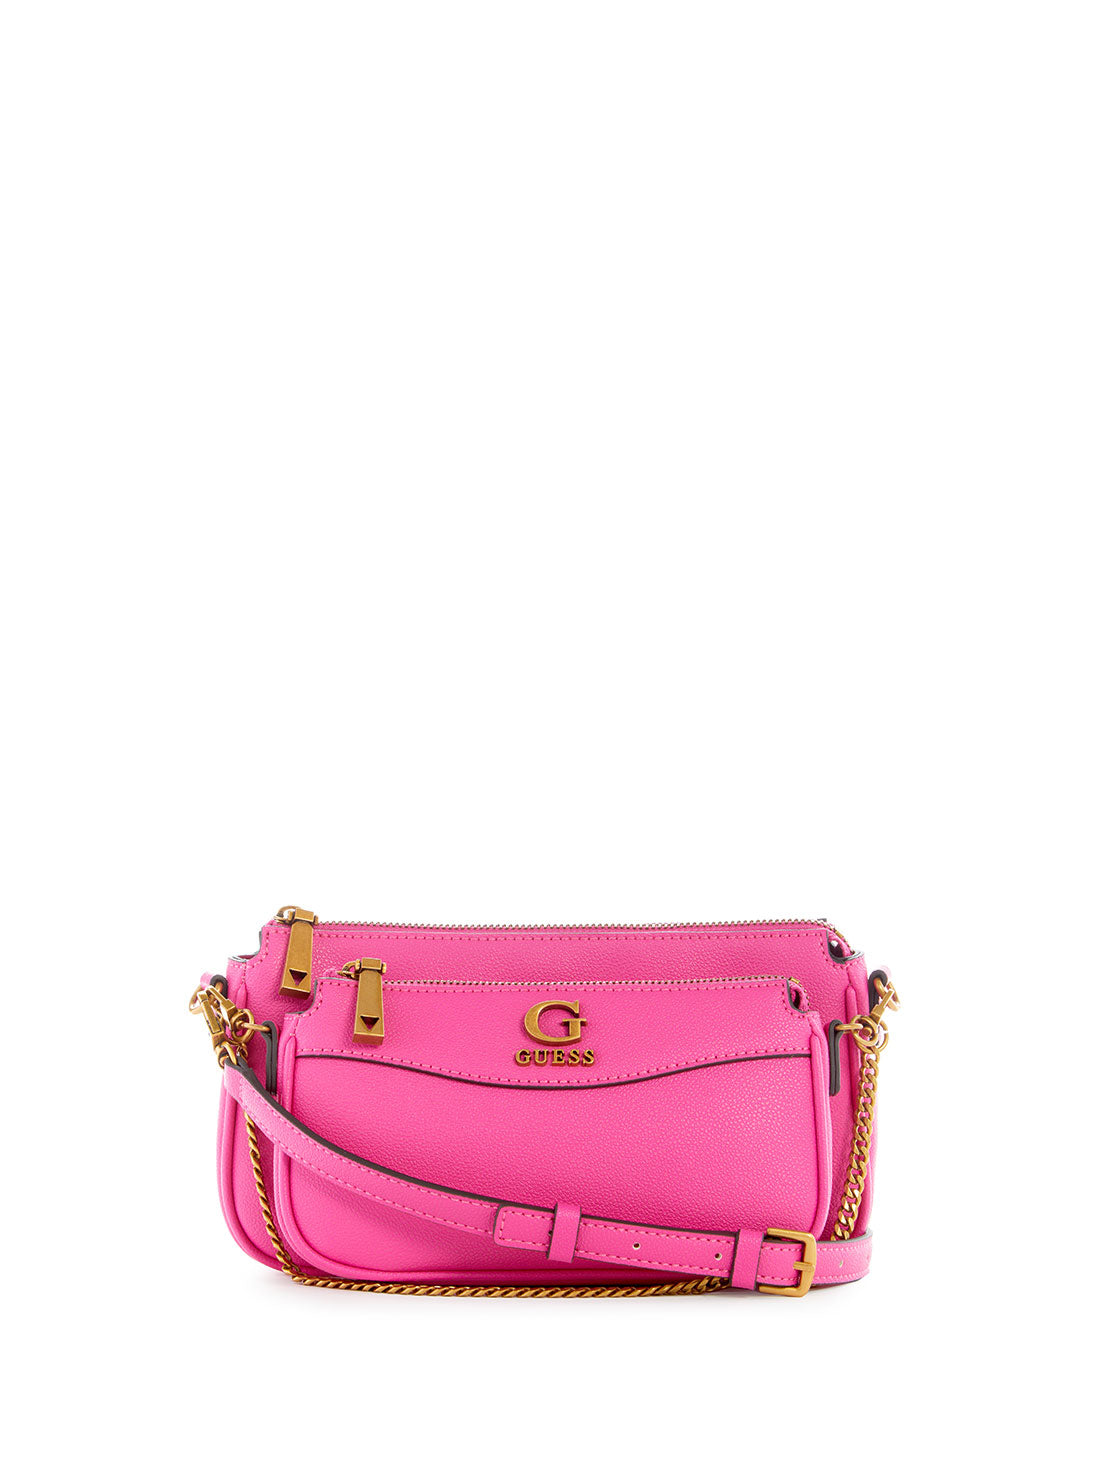 GUESS Women's Fuchsia Nell Crossbody Pouch Bag VB867870 Front View